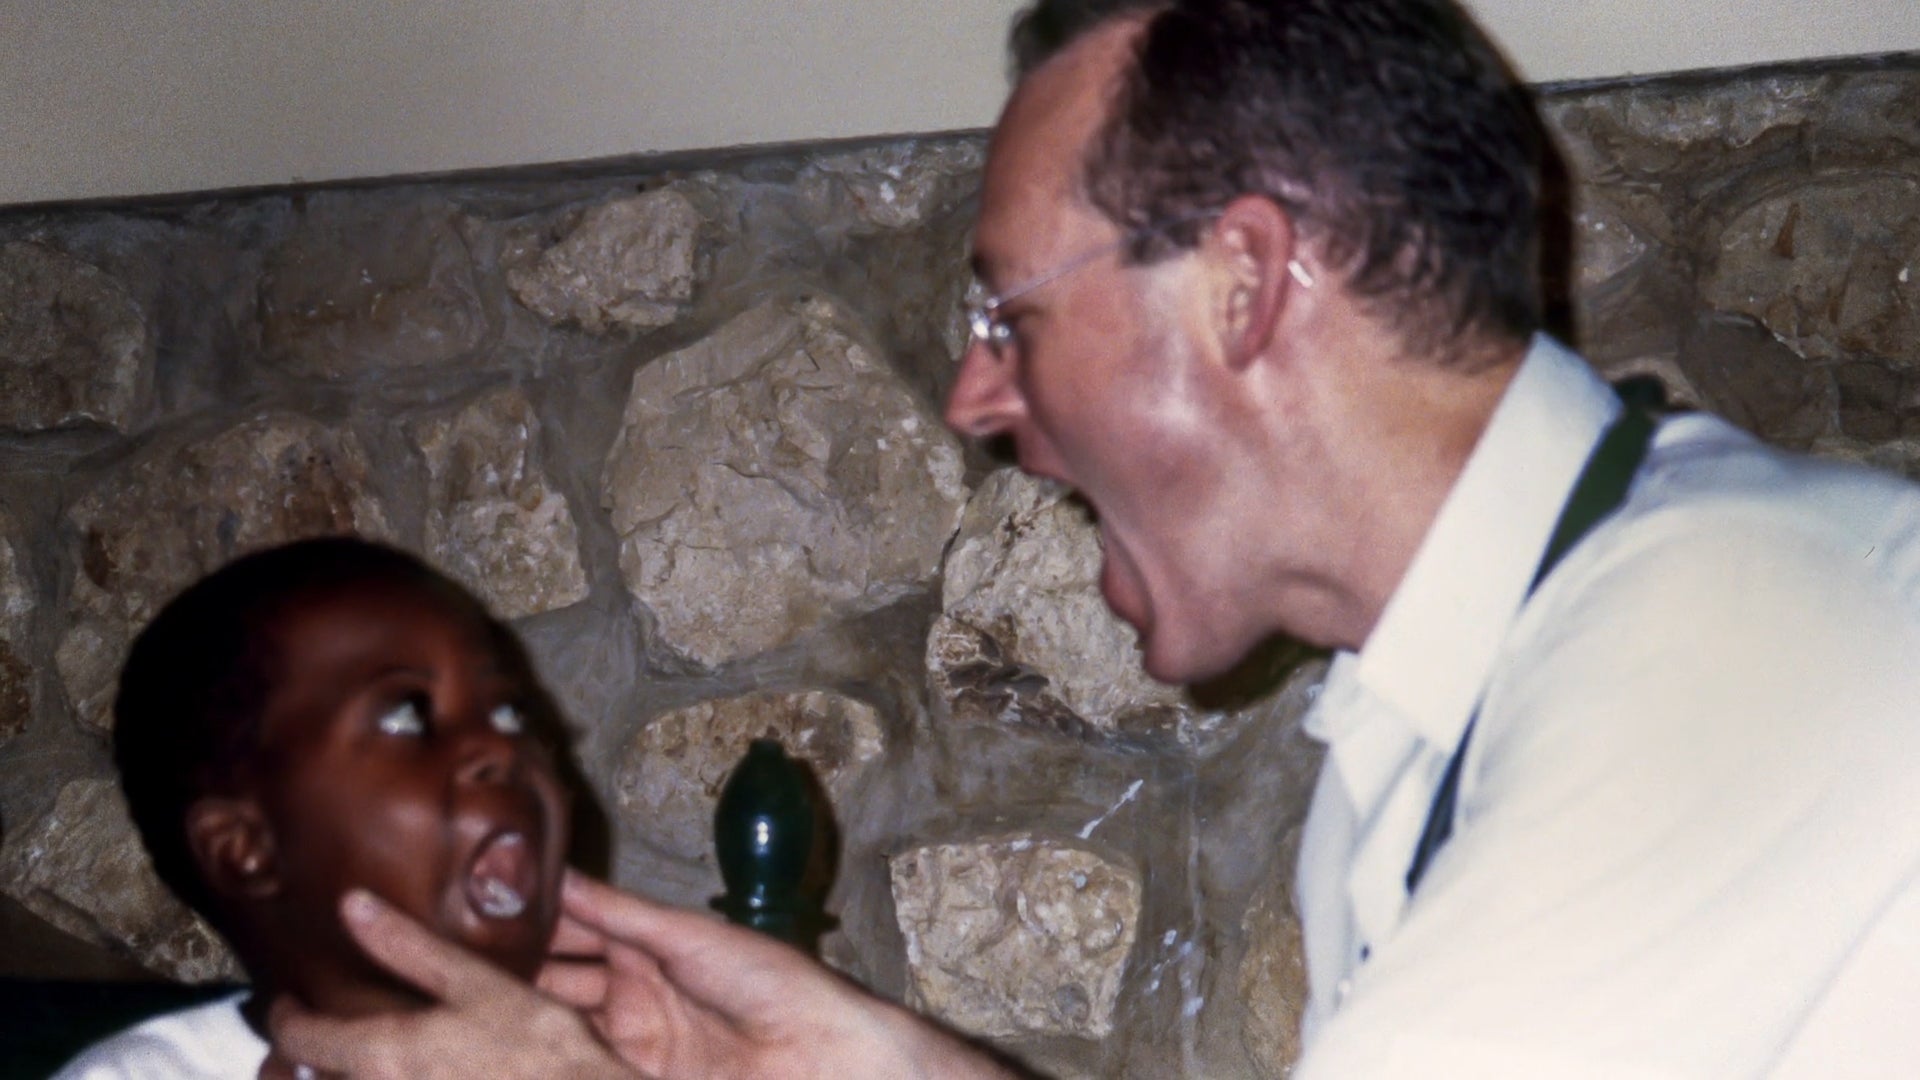 Dr. Paul Farmer examines a young patient in Haiti.